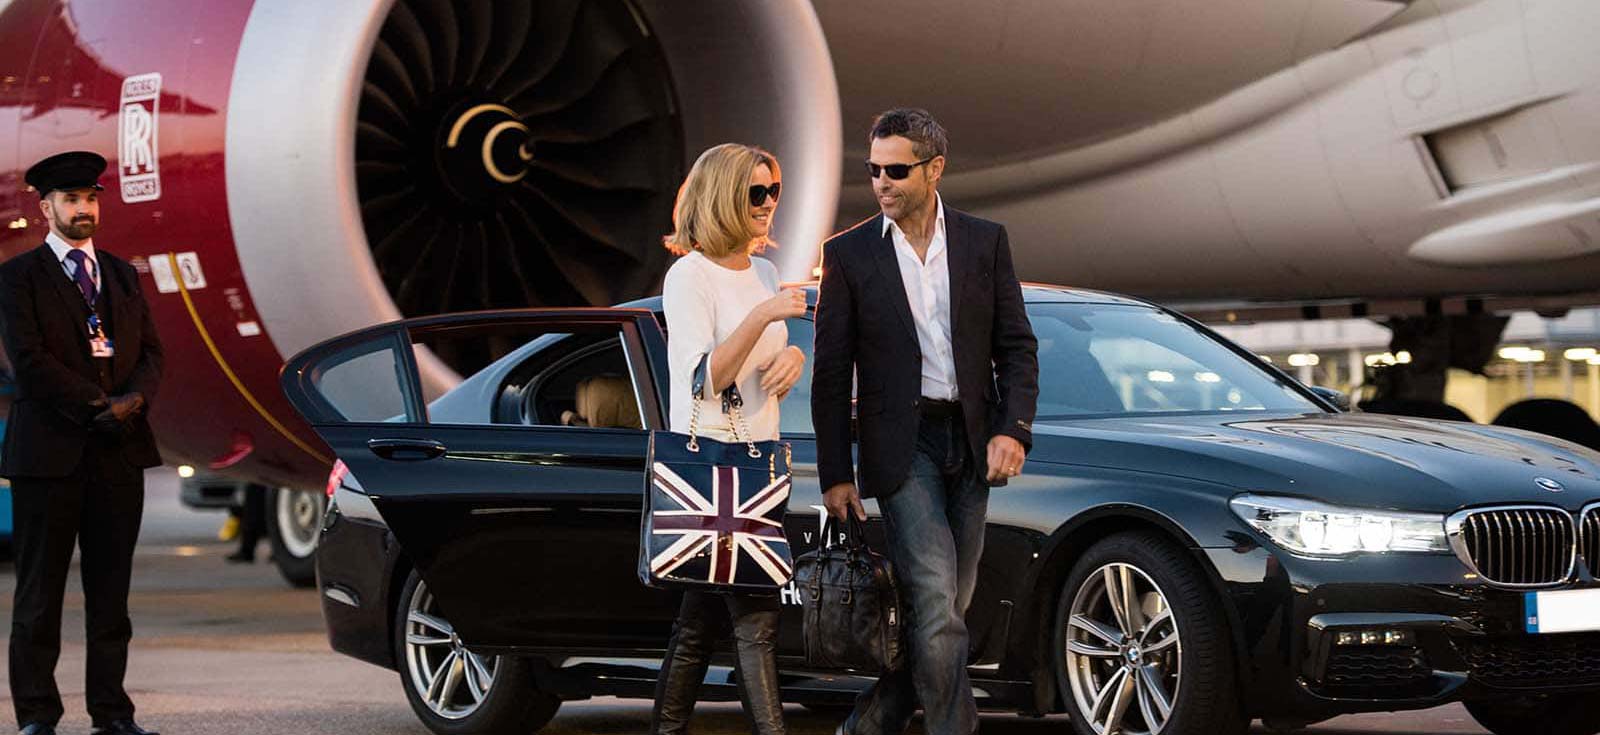 Luxury Car Hire Melbourne Airport | Luxury Taxis Melbourne | Luxury Taxi Service Melbourne | Executive Cars Melbourne